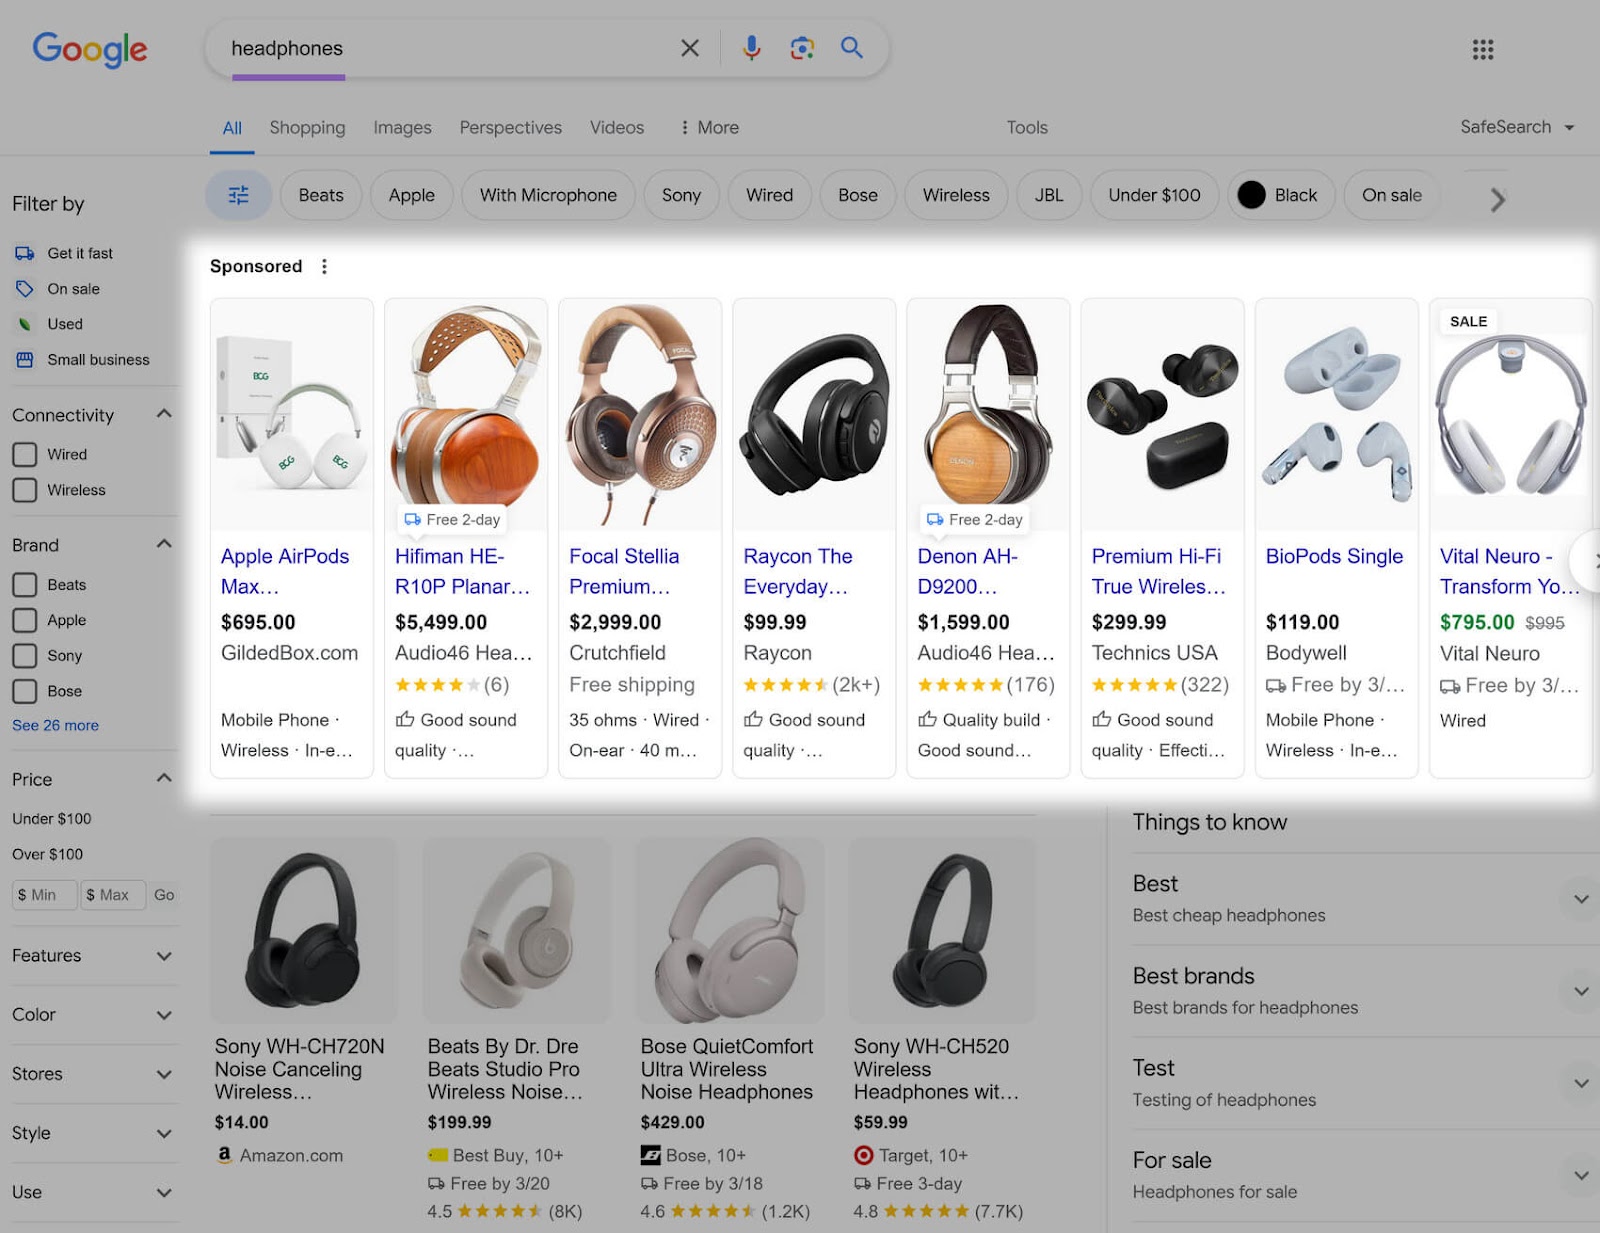 Product Listing Ads (PLAs) connected  Google SERP for "headphones"